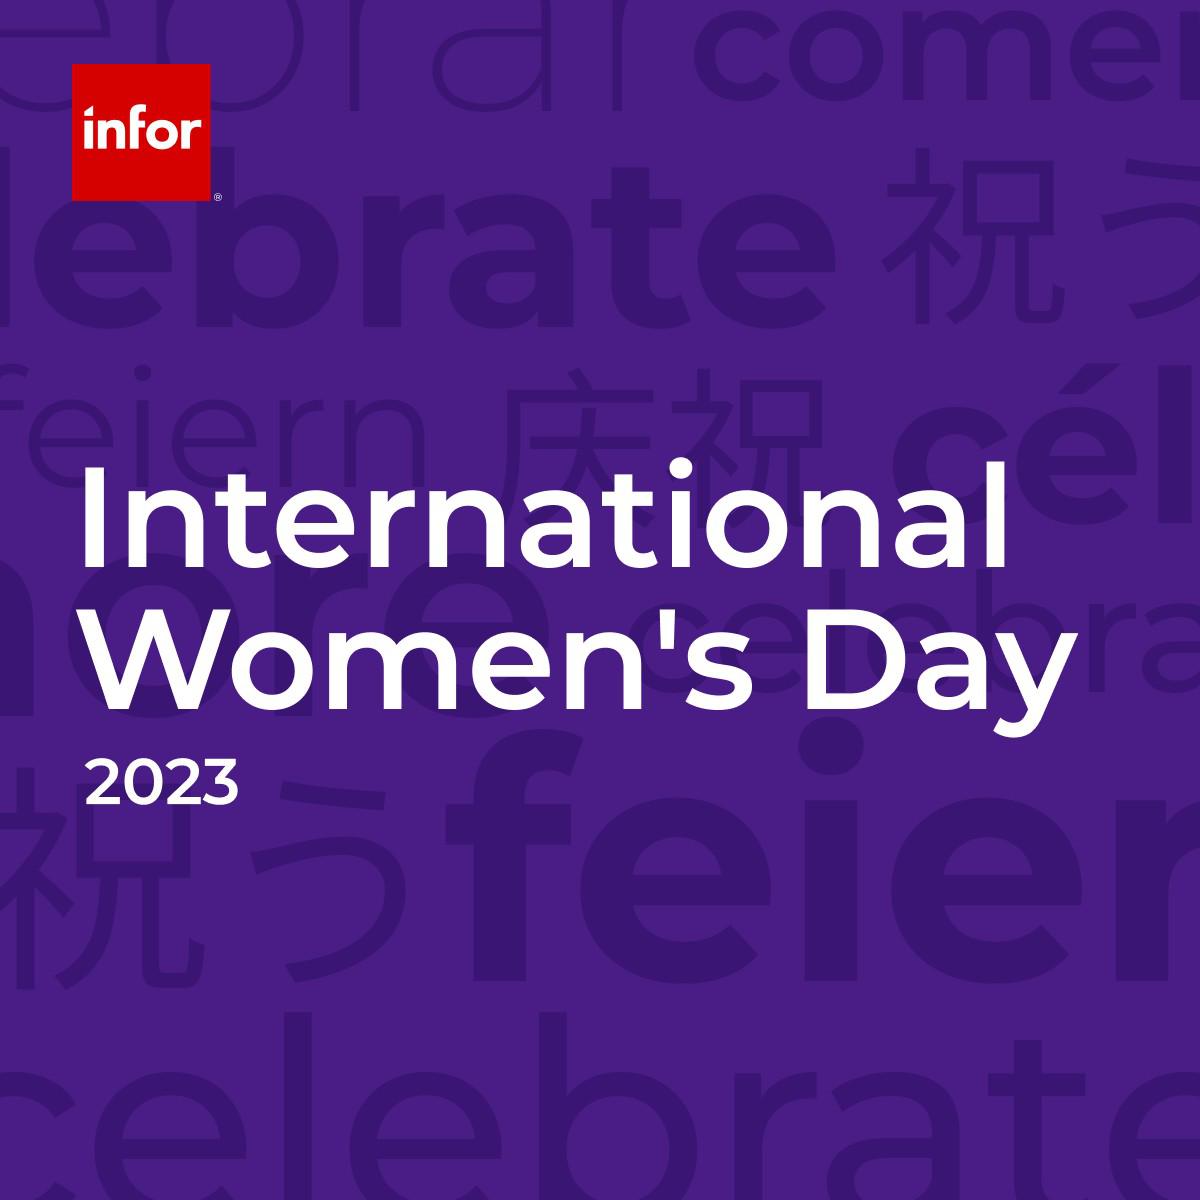 Today on #IWD2023 and beyond, #TeamInfor is committed to continue learning how @Infor can create an environment where all individuals have equal opportunities to contribute and realize their potential. During #WHM we are organizing several events focused on empowering #WITInfor.